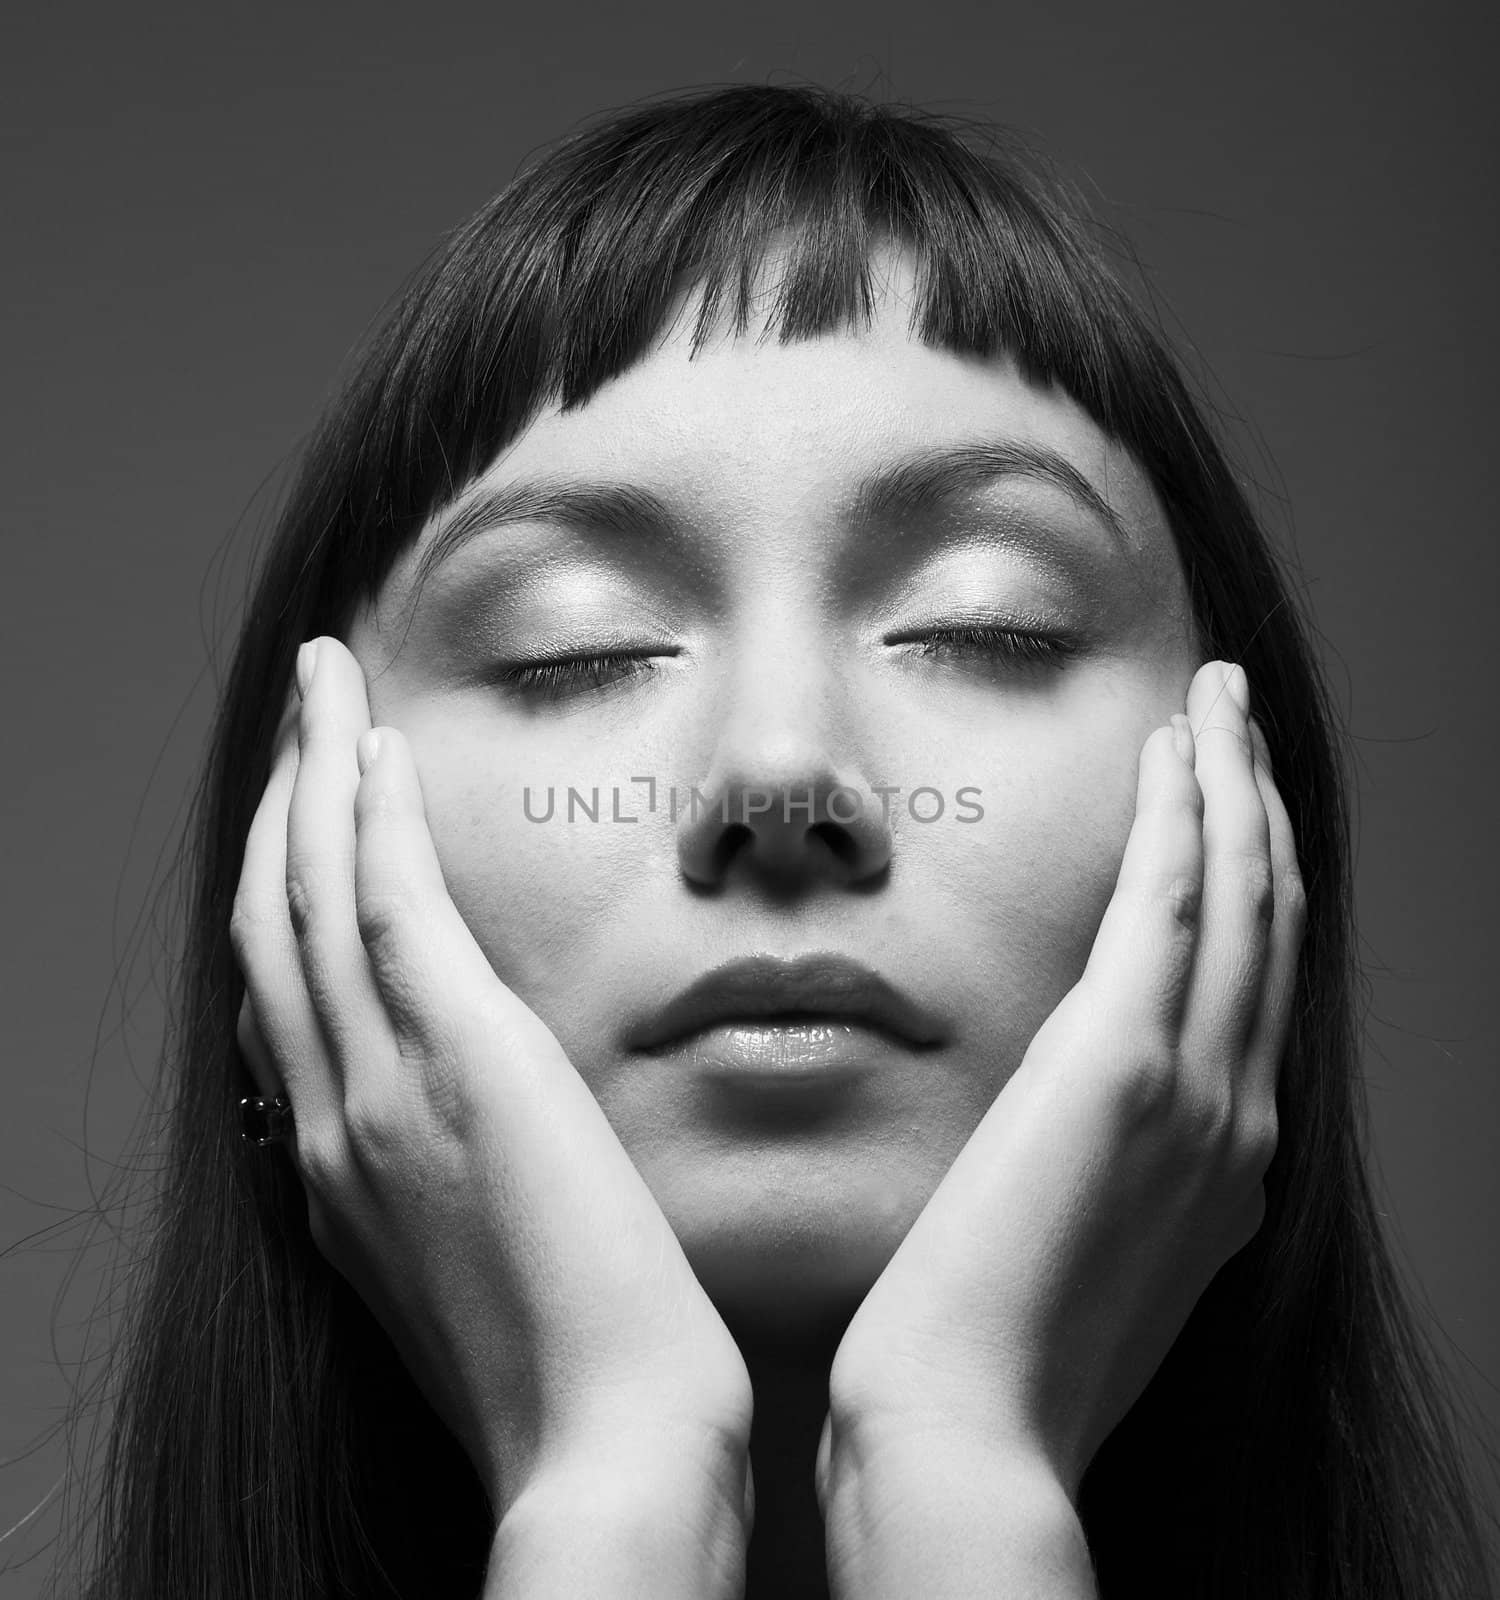 sensual dark portrait of a young woman with closed eyes

